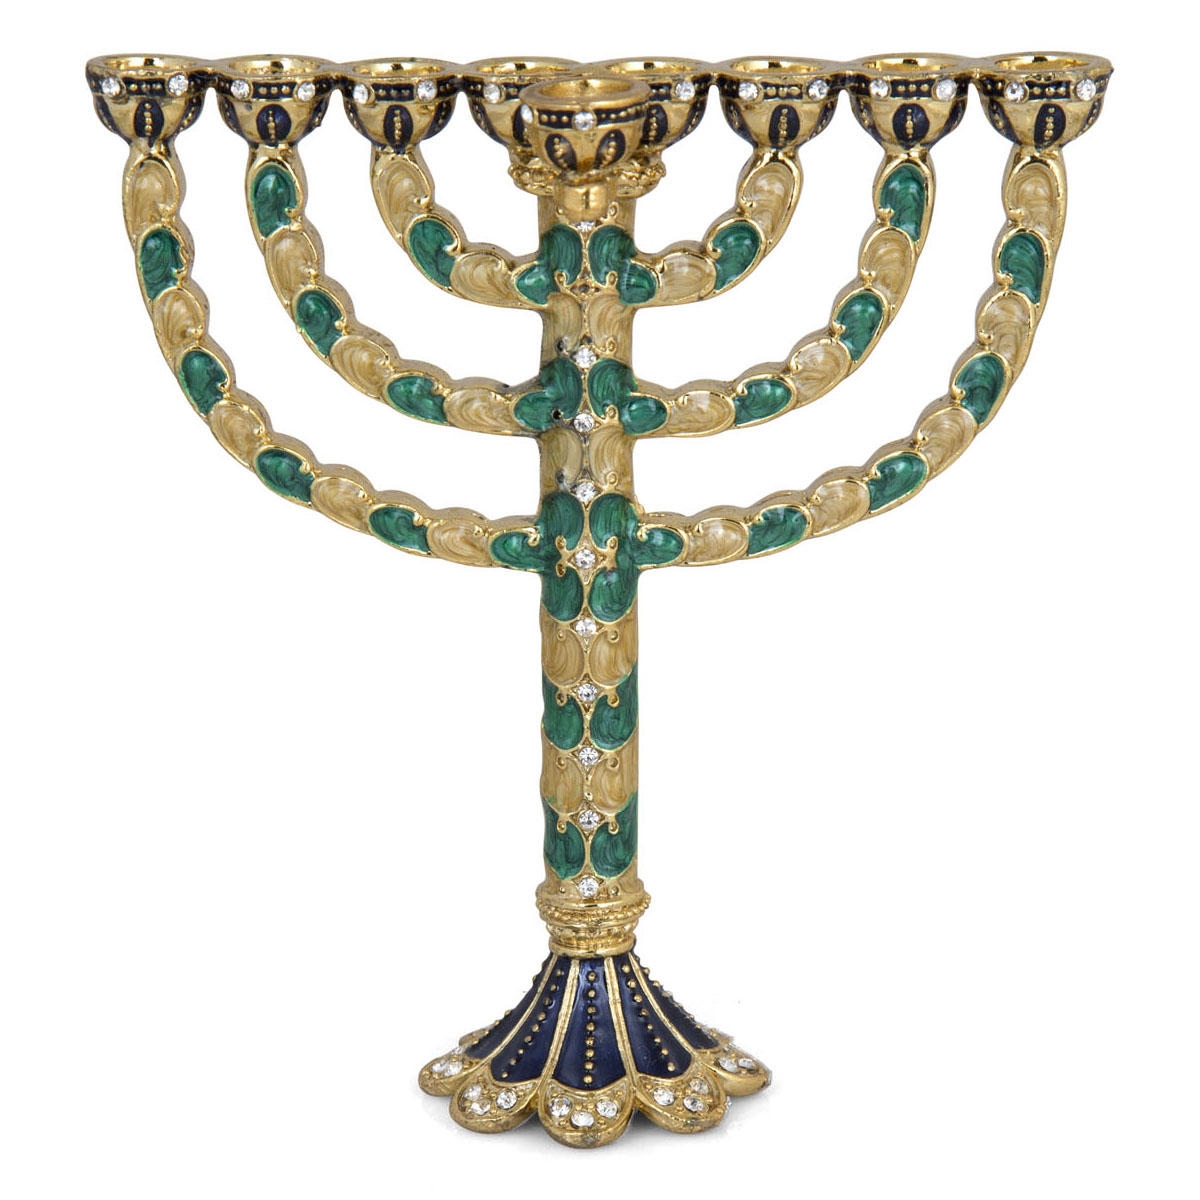 Enameled and Jeweled Patterned Classic Miniature Menorah (2 Color Options) - 1